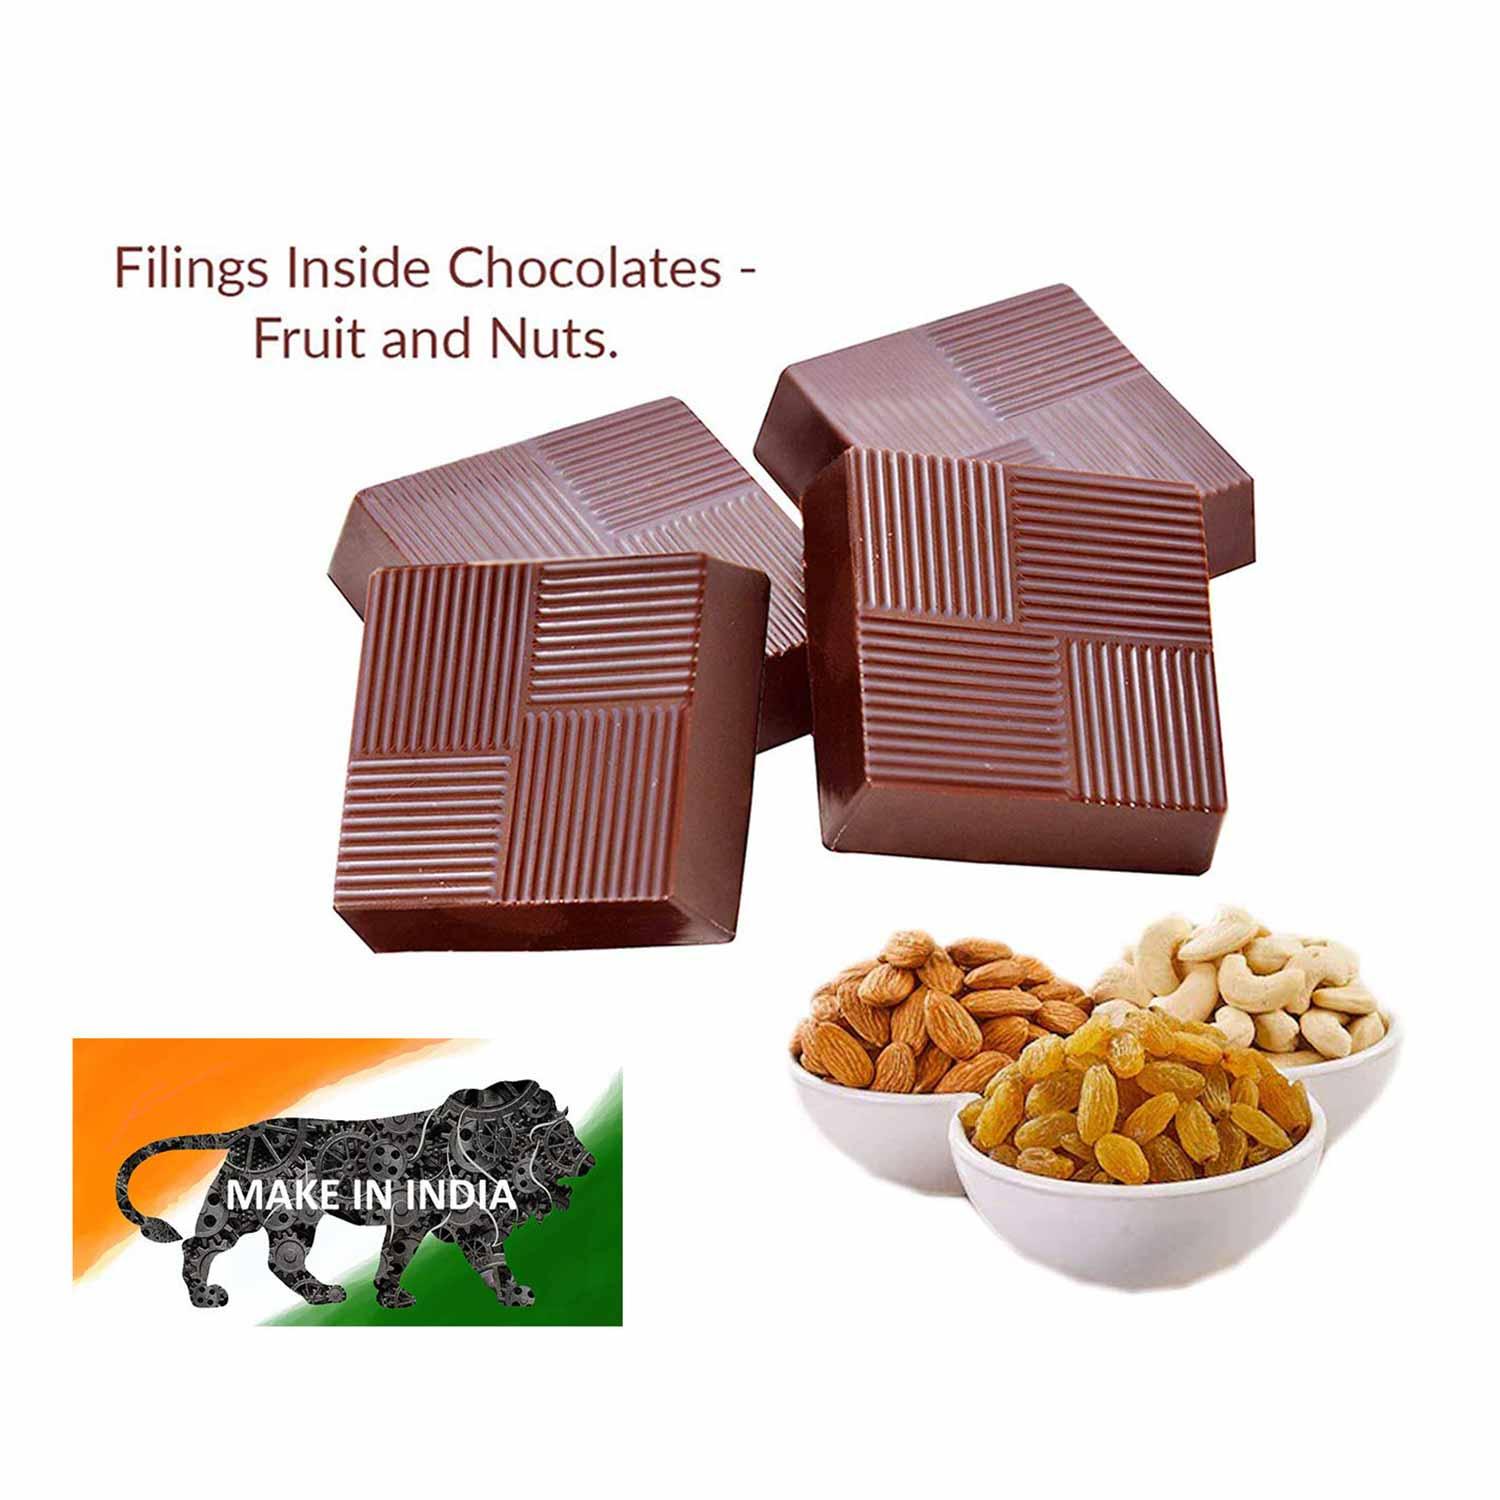 Online You & me customised printed wrappers - Choco Manual ART